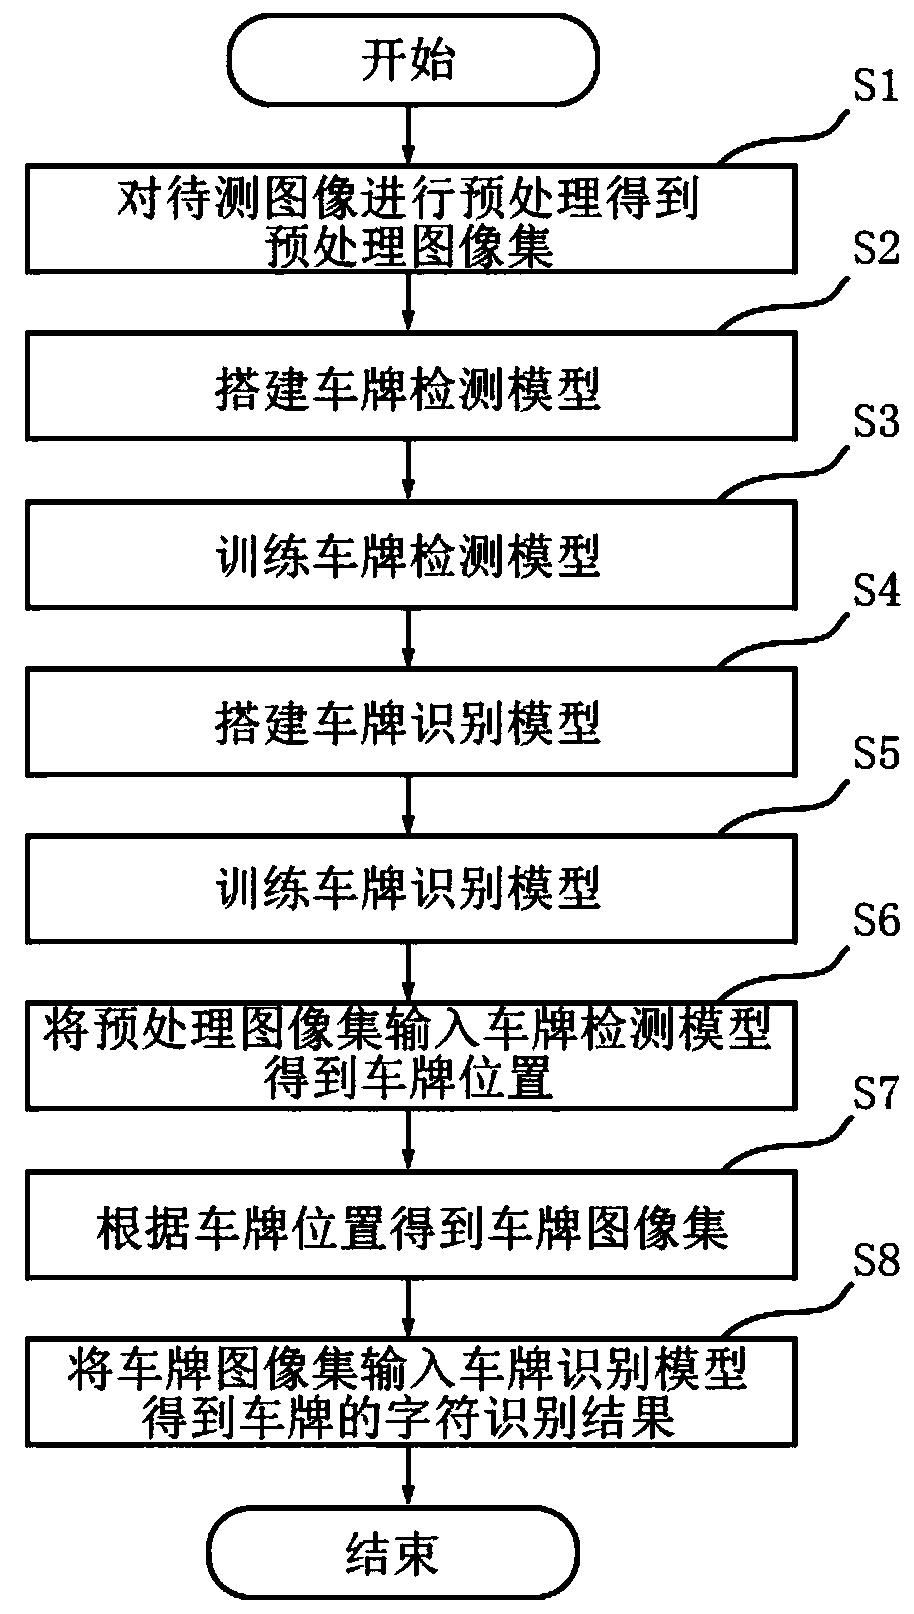 License plate recognition method and device for complex scenes